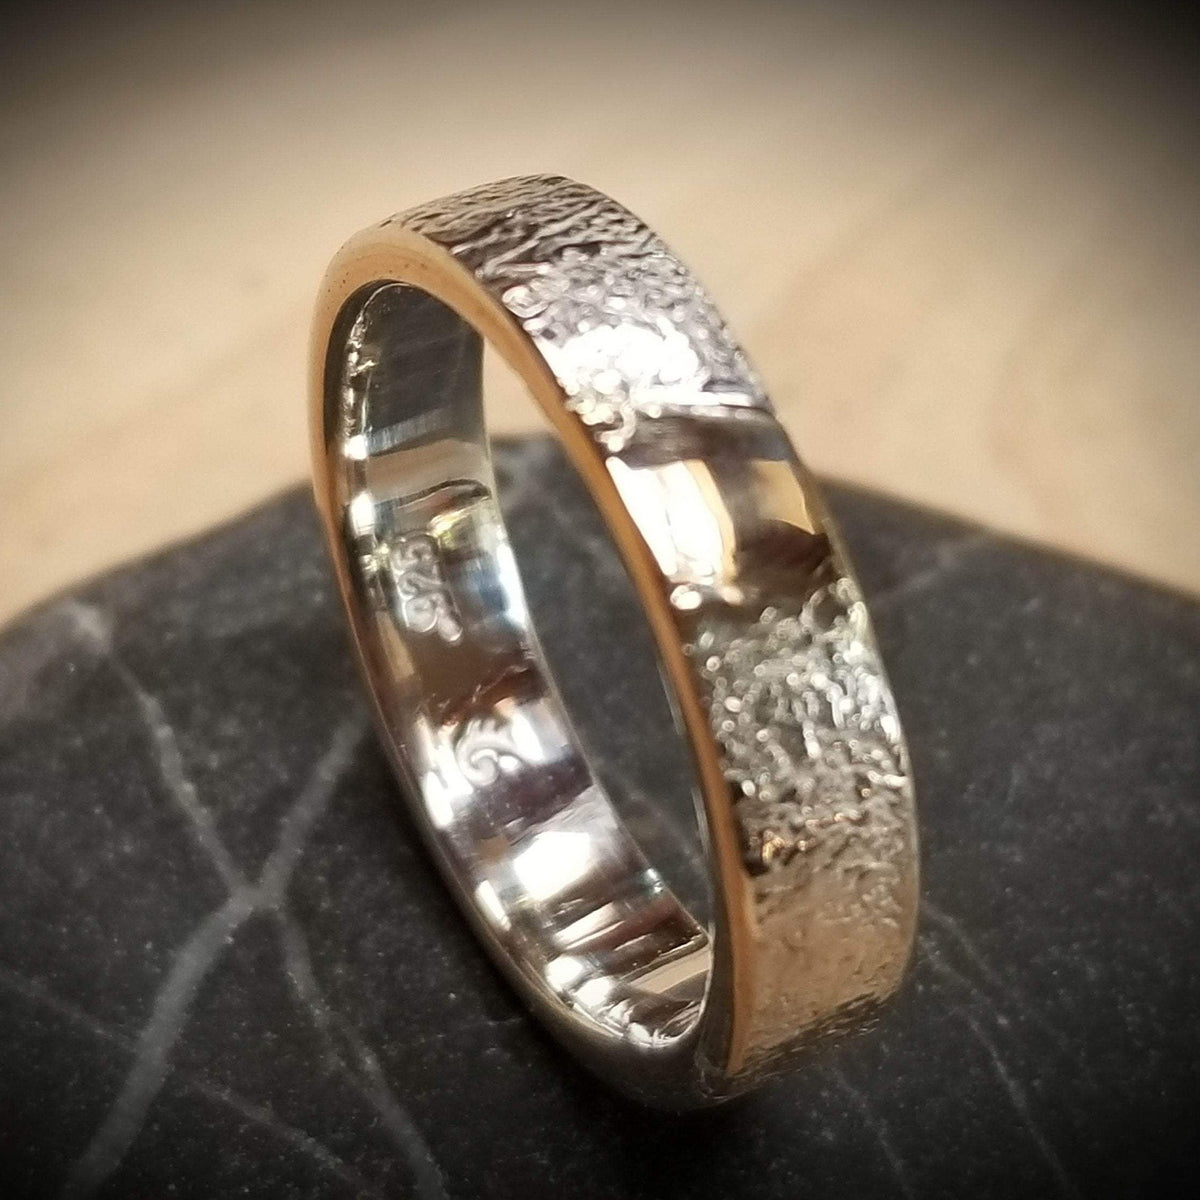 Gorgeous band with gold inlay